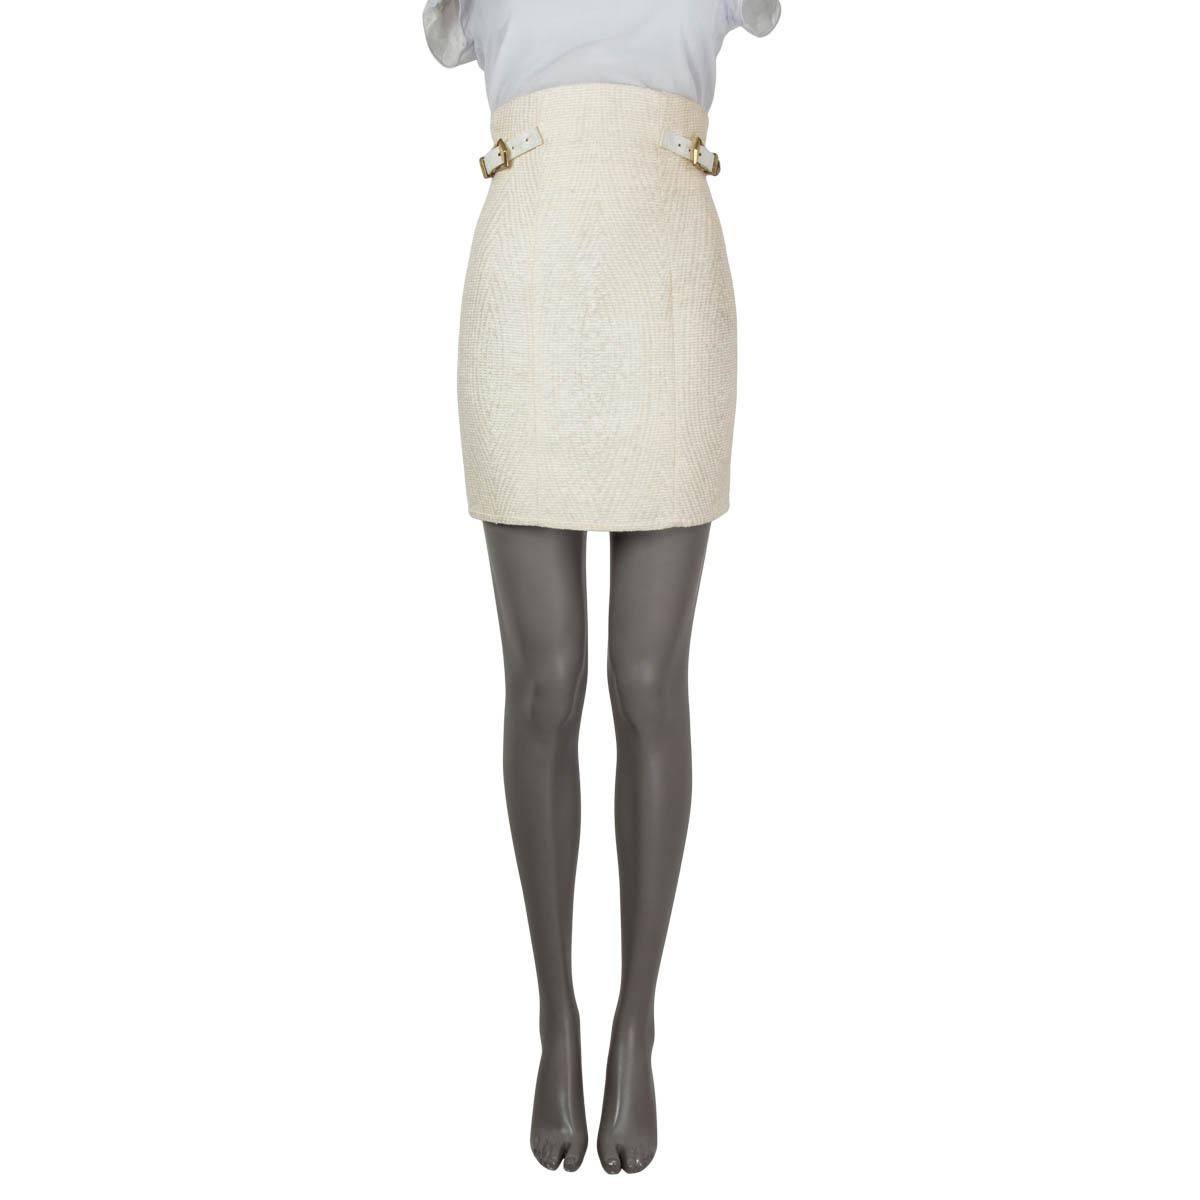 100% authentic Balmain high-waisted skirt in ivory & beige polyurethane (55%), cotton (33%), silk (6%), polyamide (4%) and wool (2%). Lined in viscose (52%) and cupro (48%). Features belted details on the waist line with gold-tone hardware. Has been